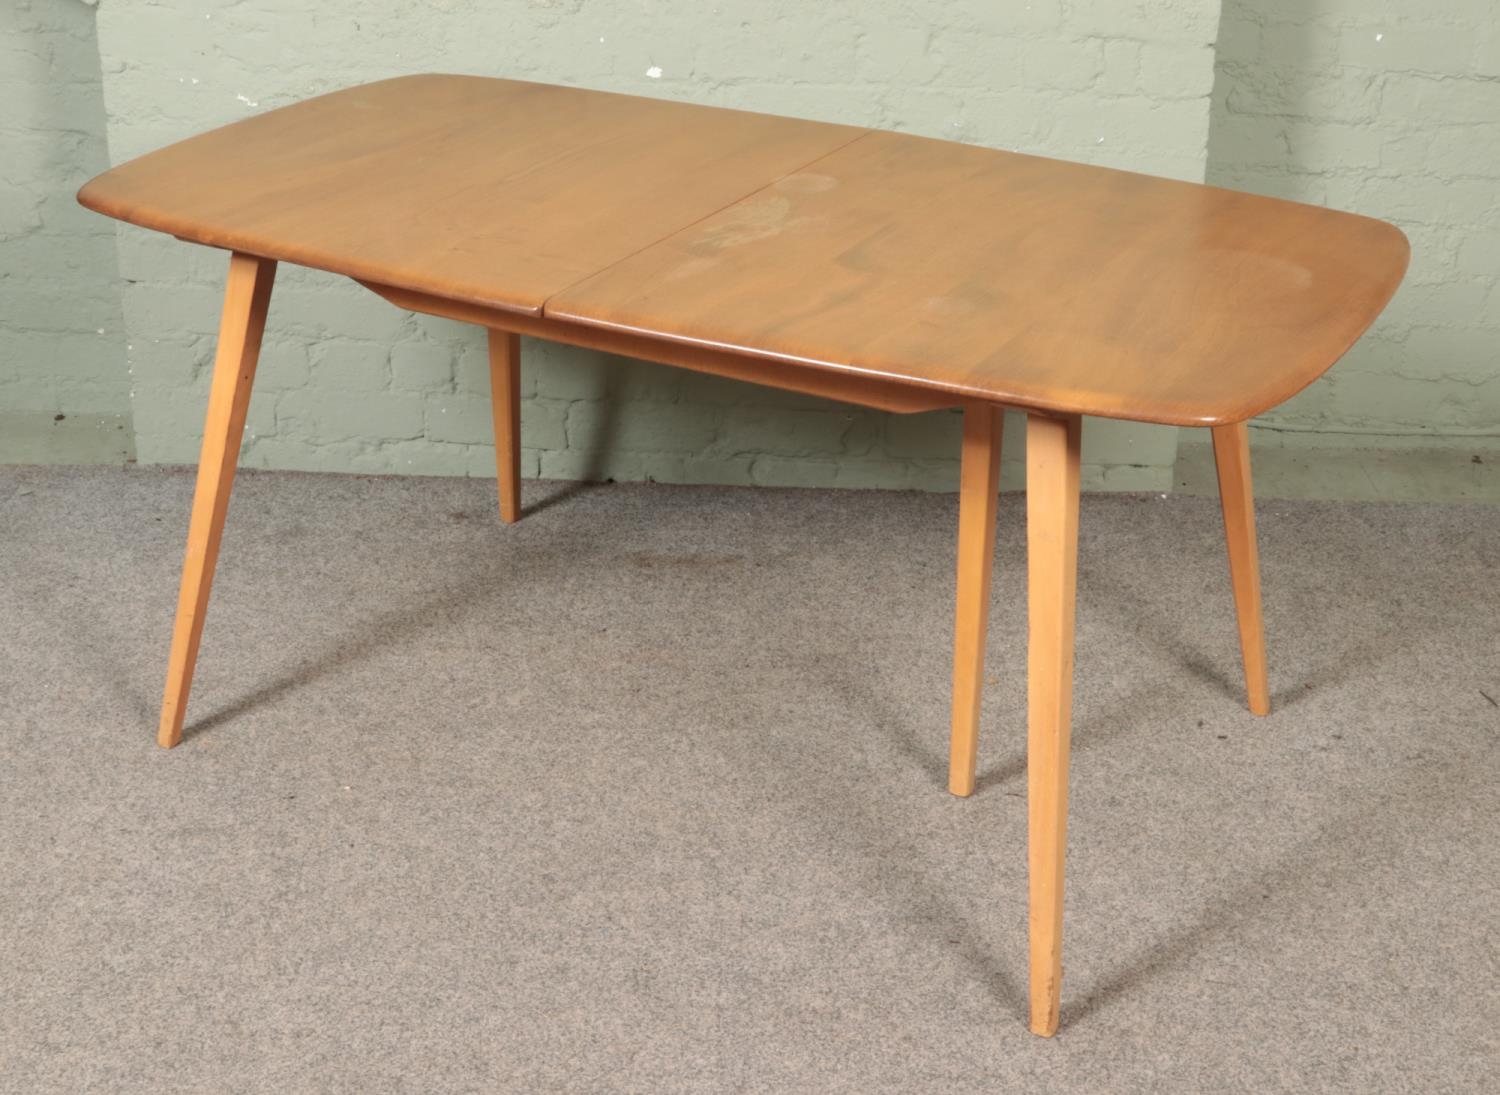 An Ercol 'Grand Windsor' light oak and ash extending dining table, with hinged additional leaf,